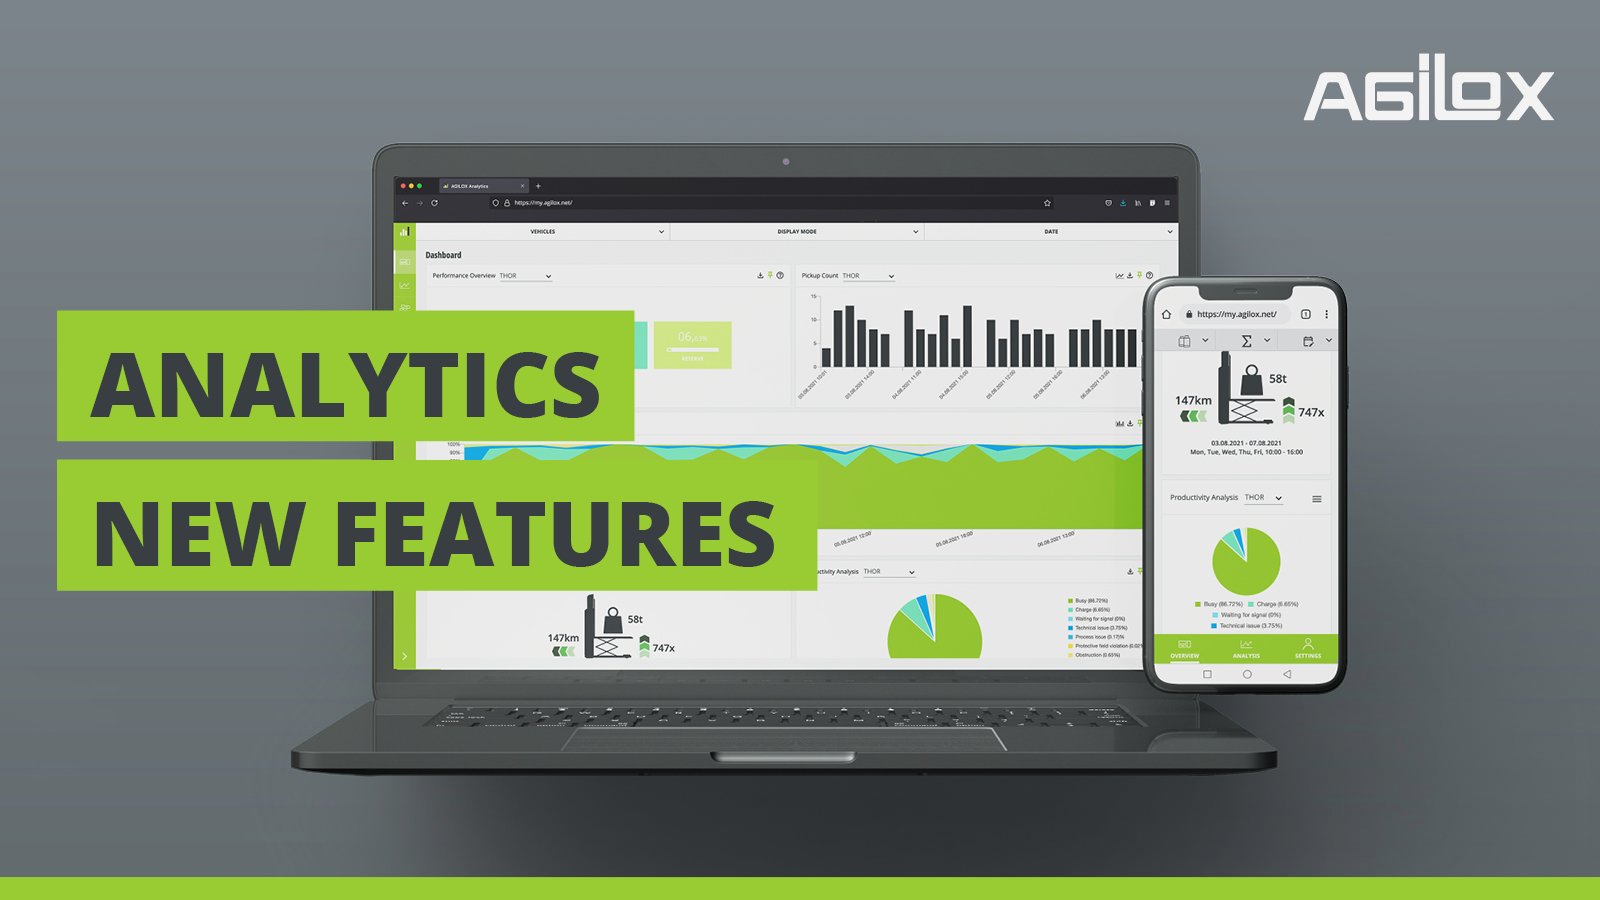 AGILOX Analytics has launched new features